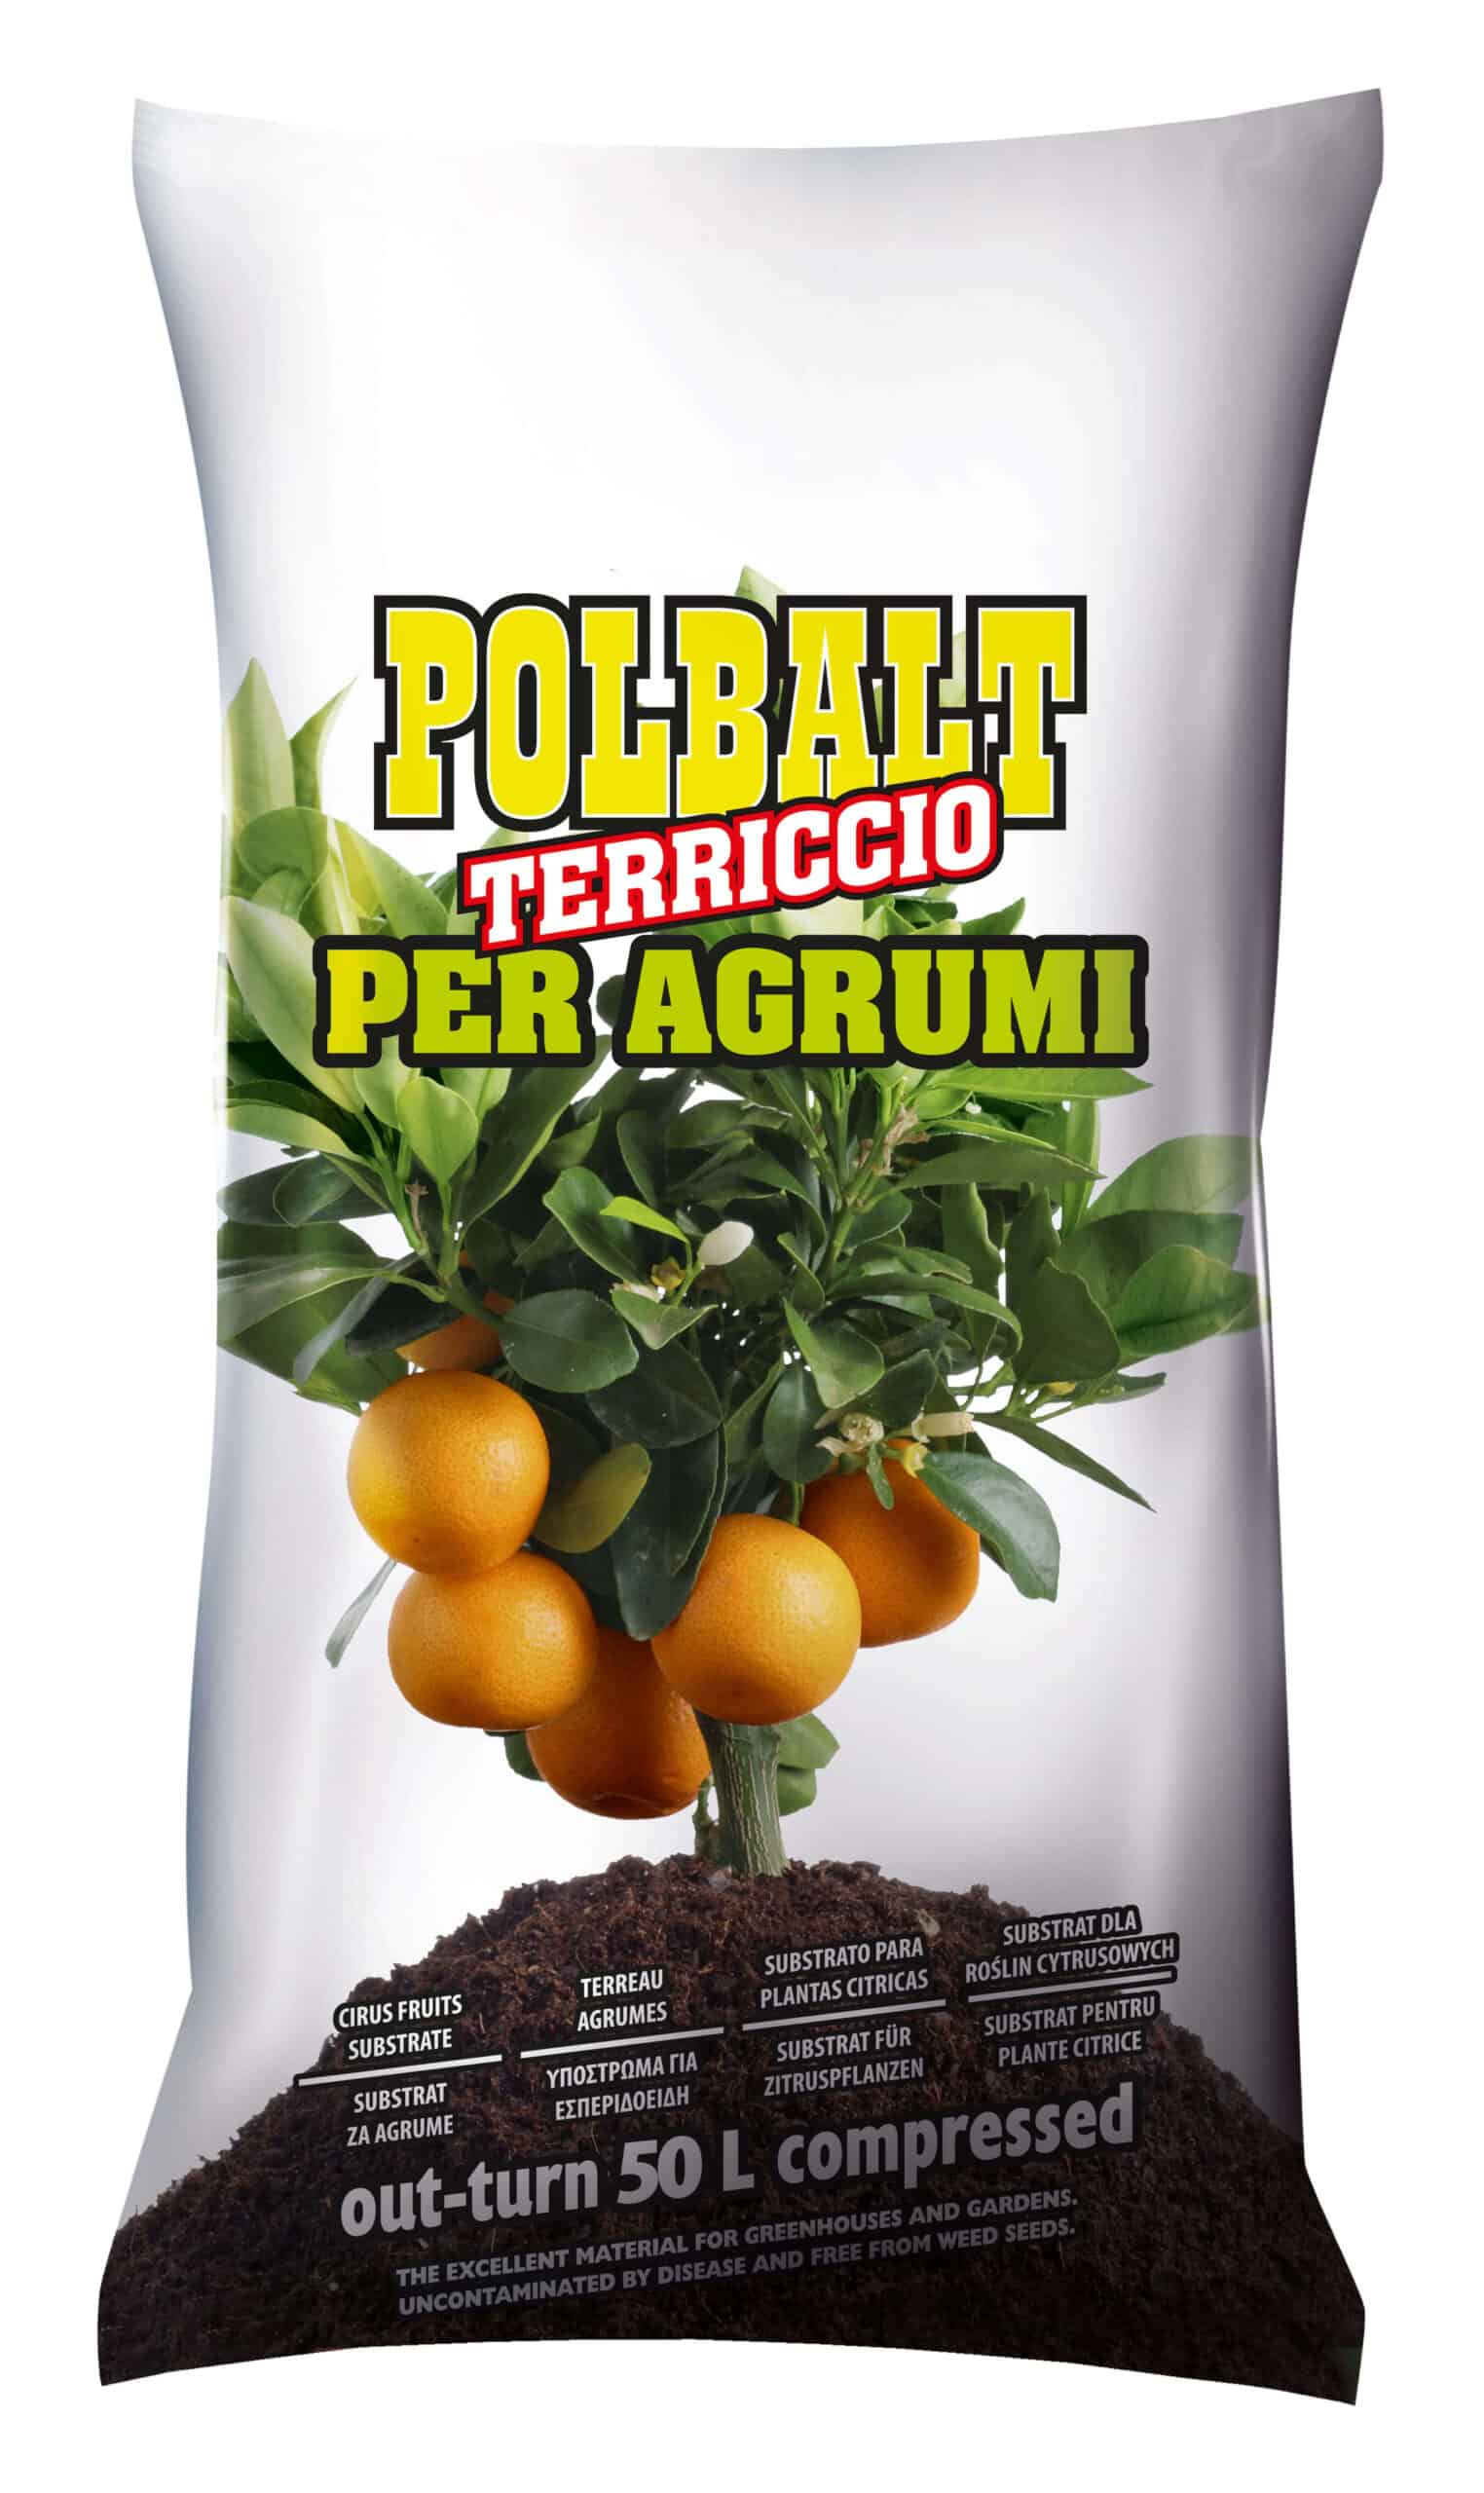 A package of Polbalt substrate for citrus